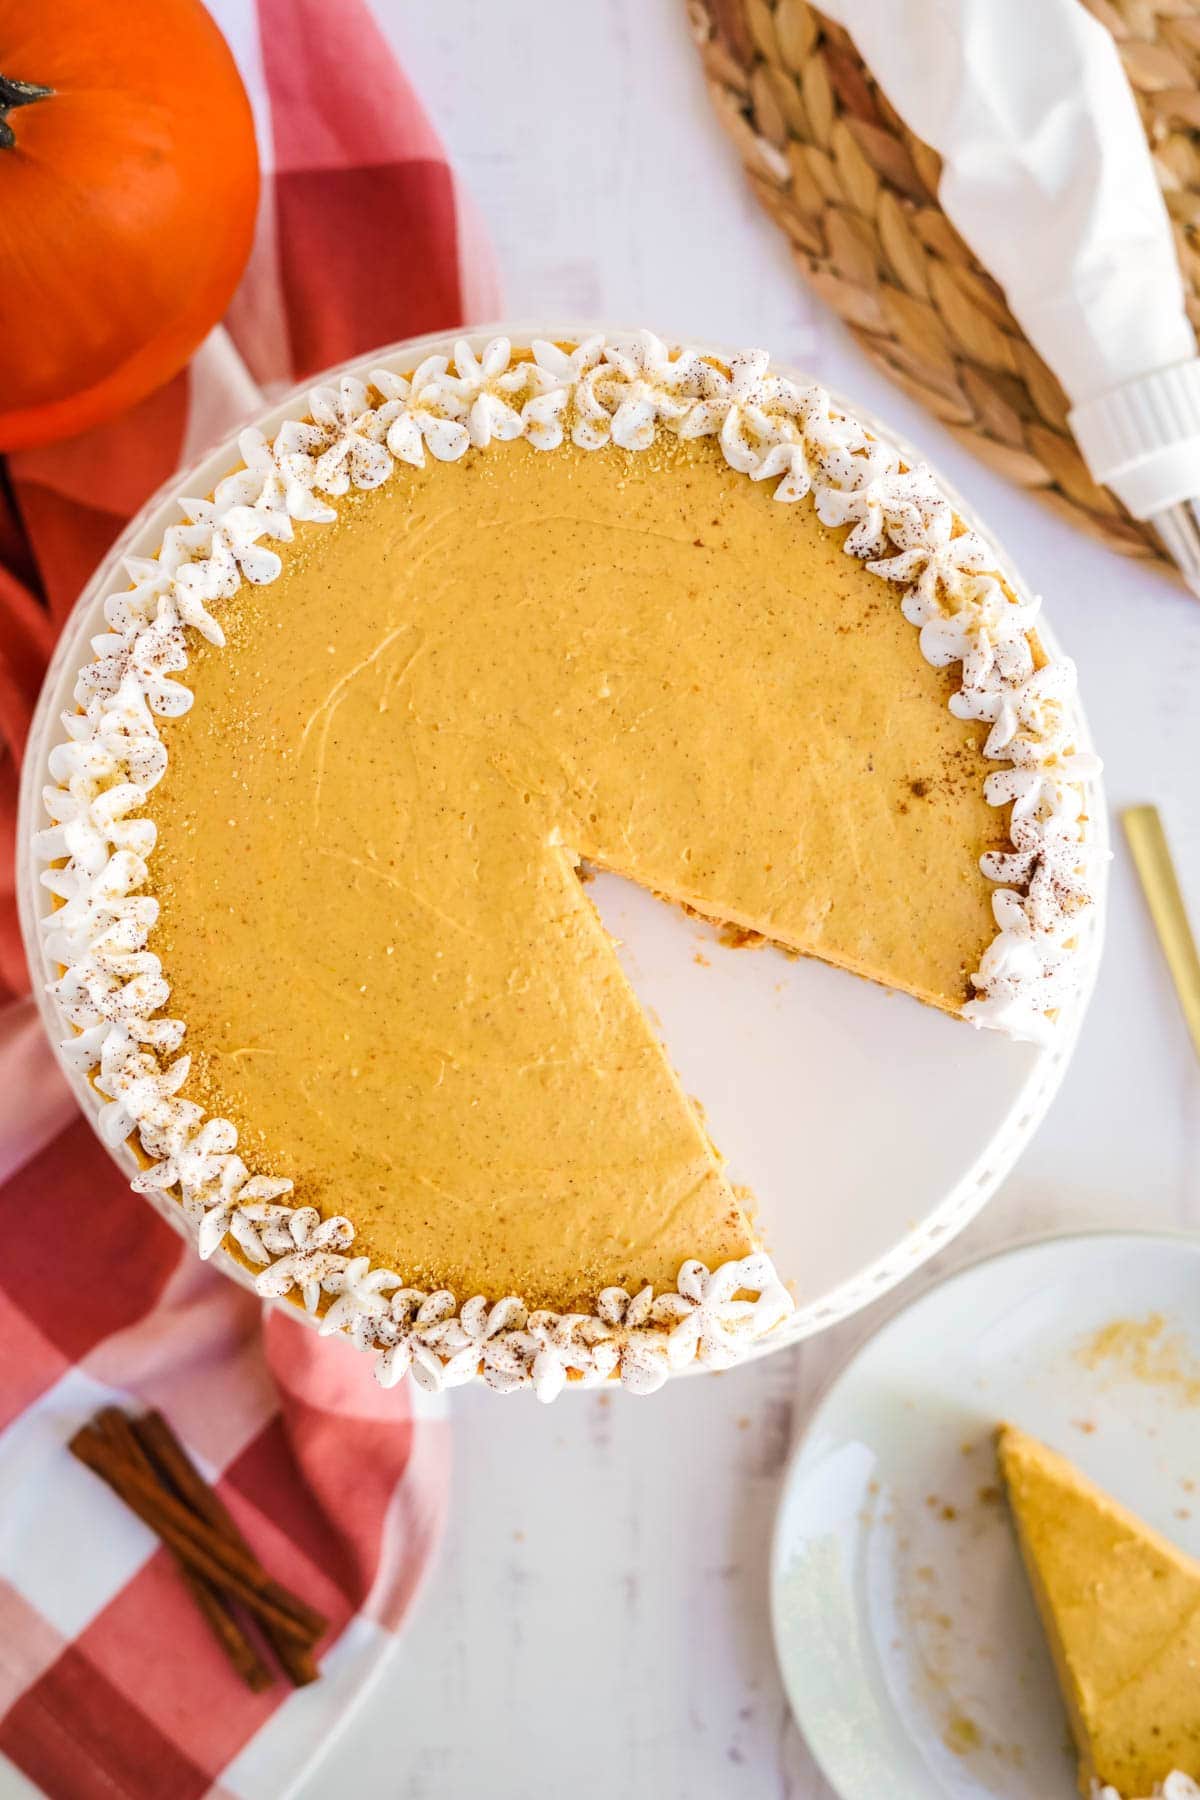 pumpkin cheesecake, with a slice taken out